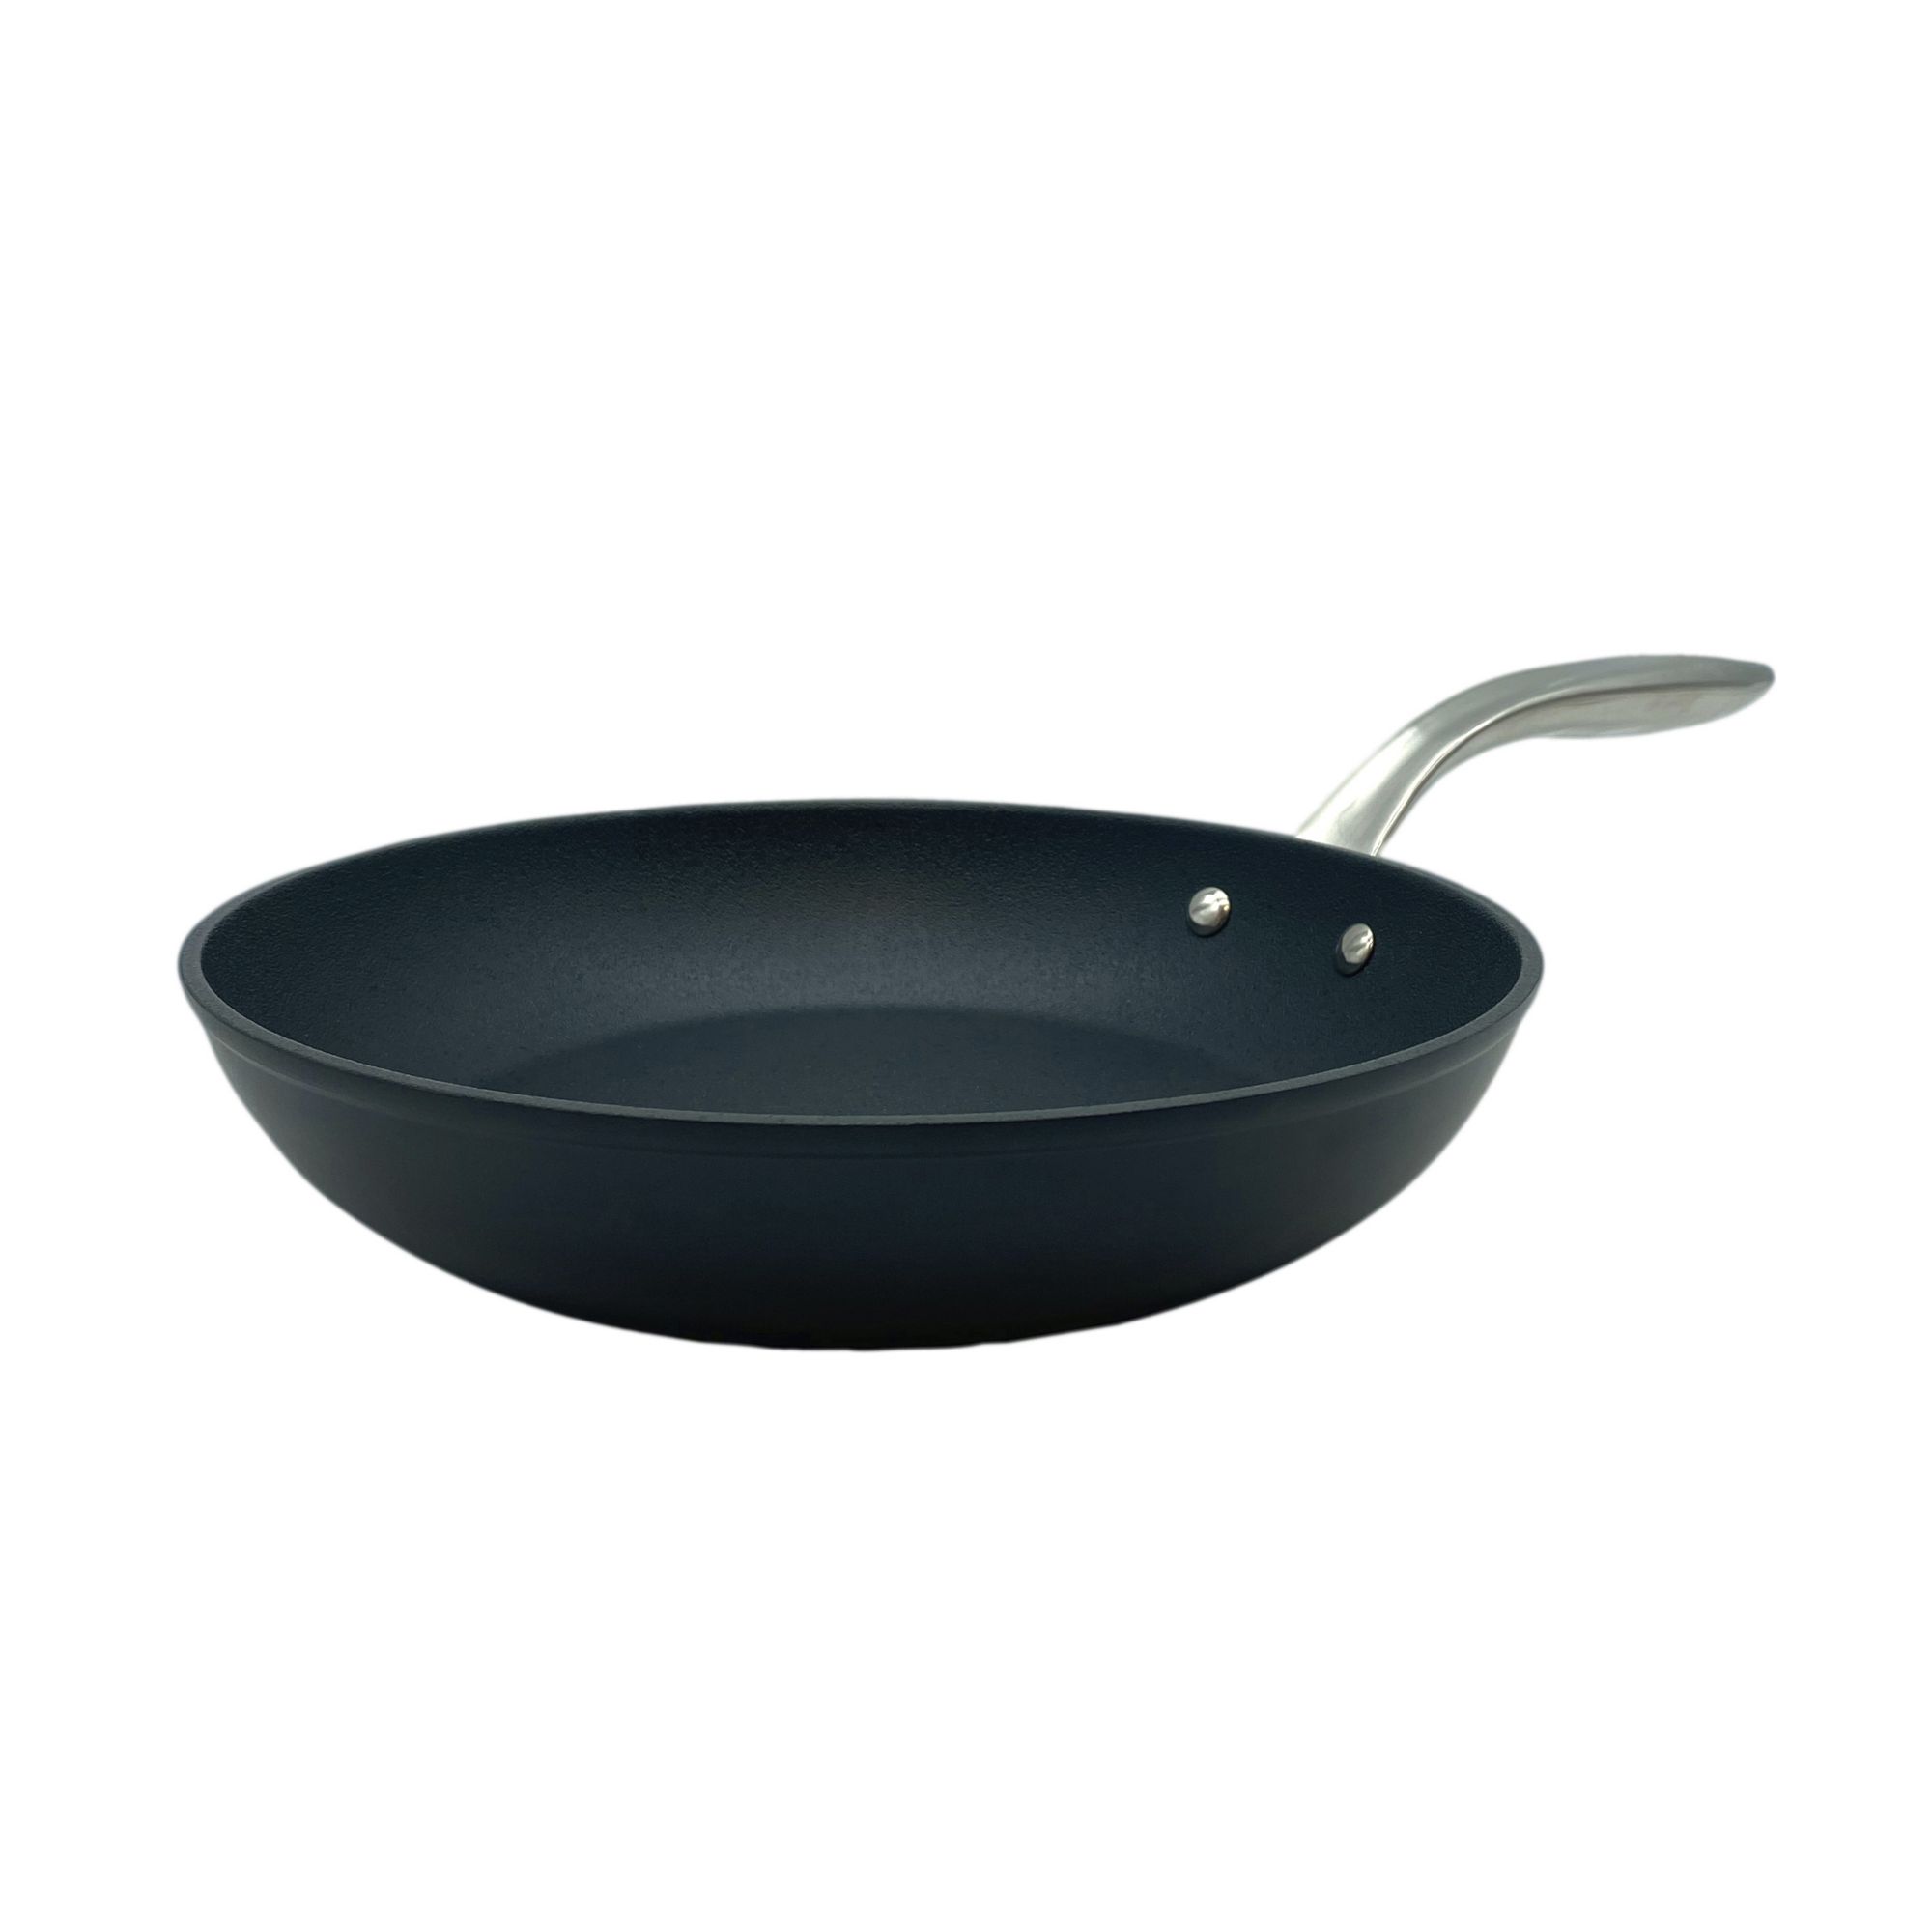 Oxo Softworks 1515884 Professional Grade Non-stick Skillet Pan 2Pc